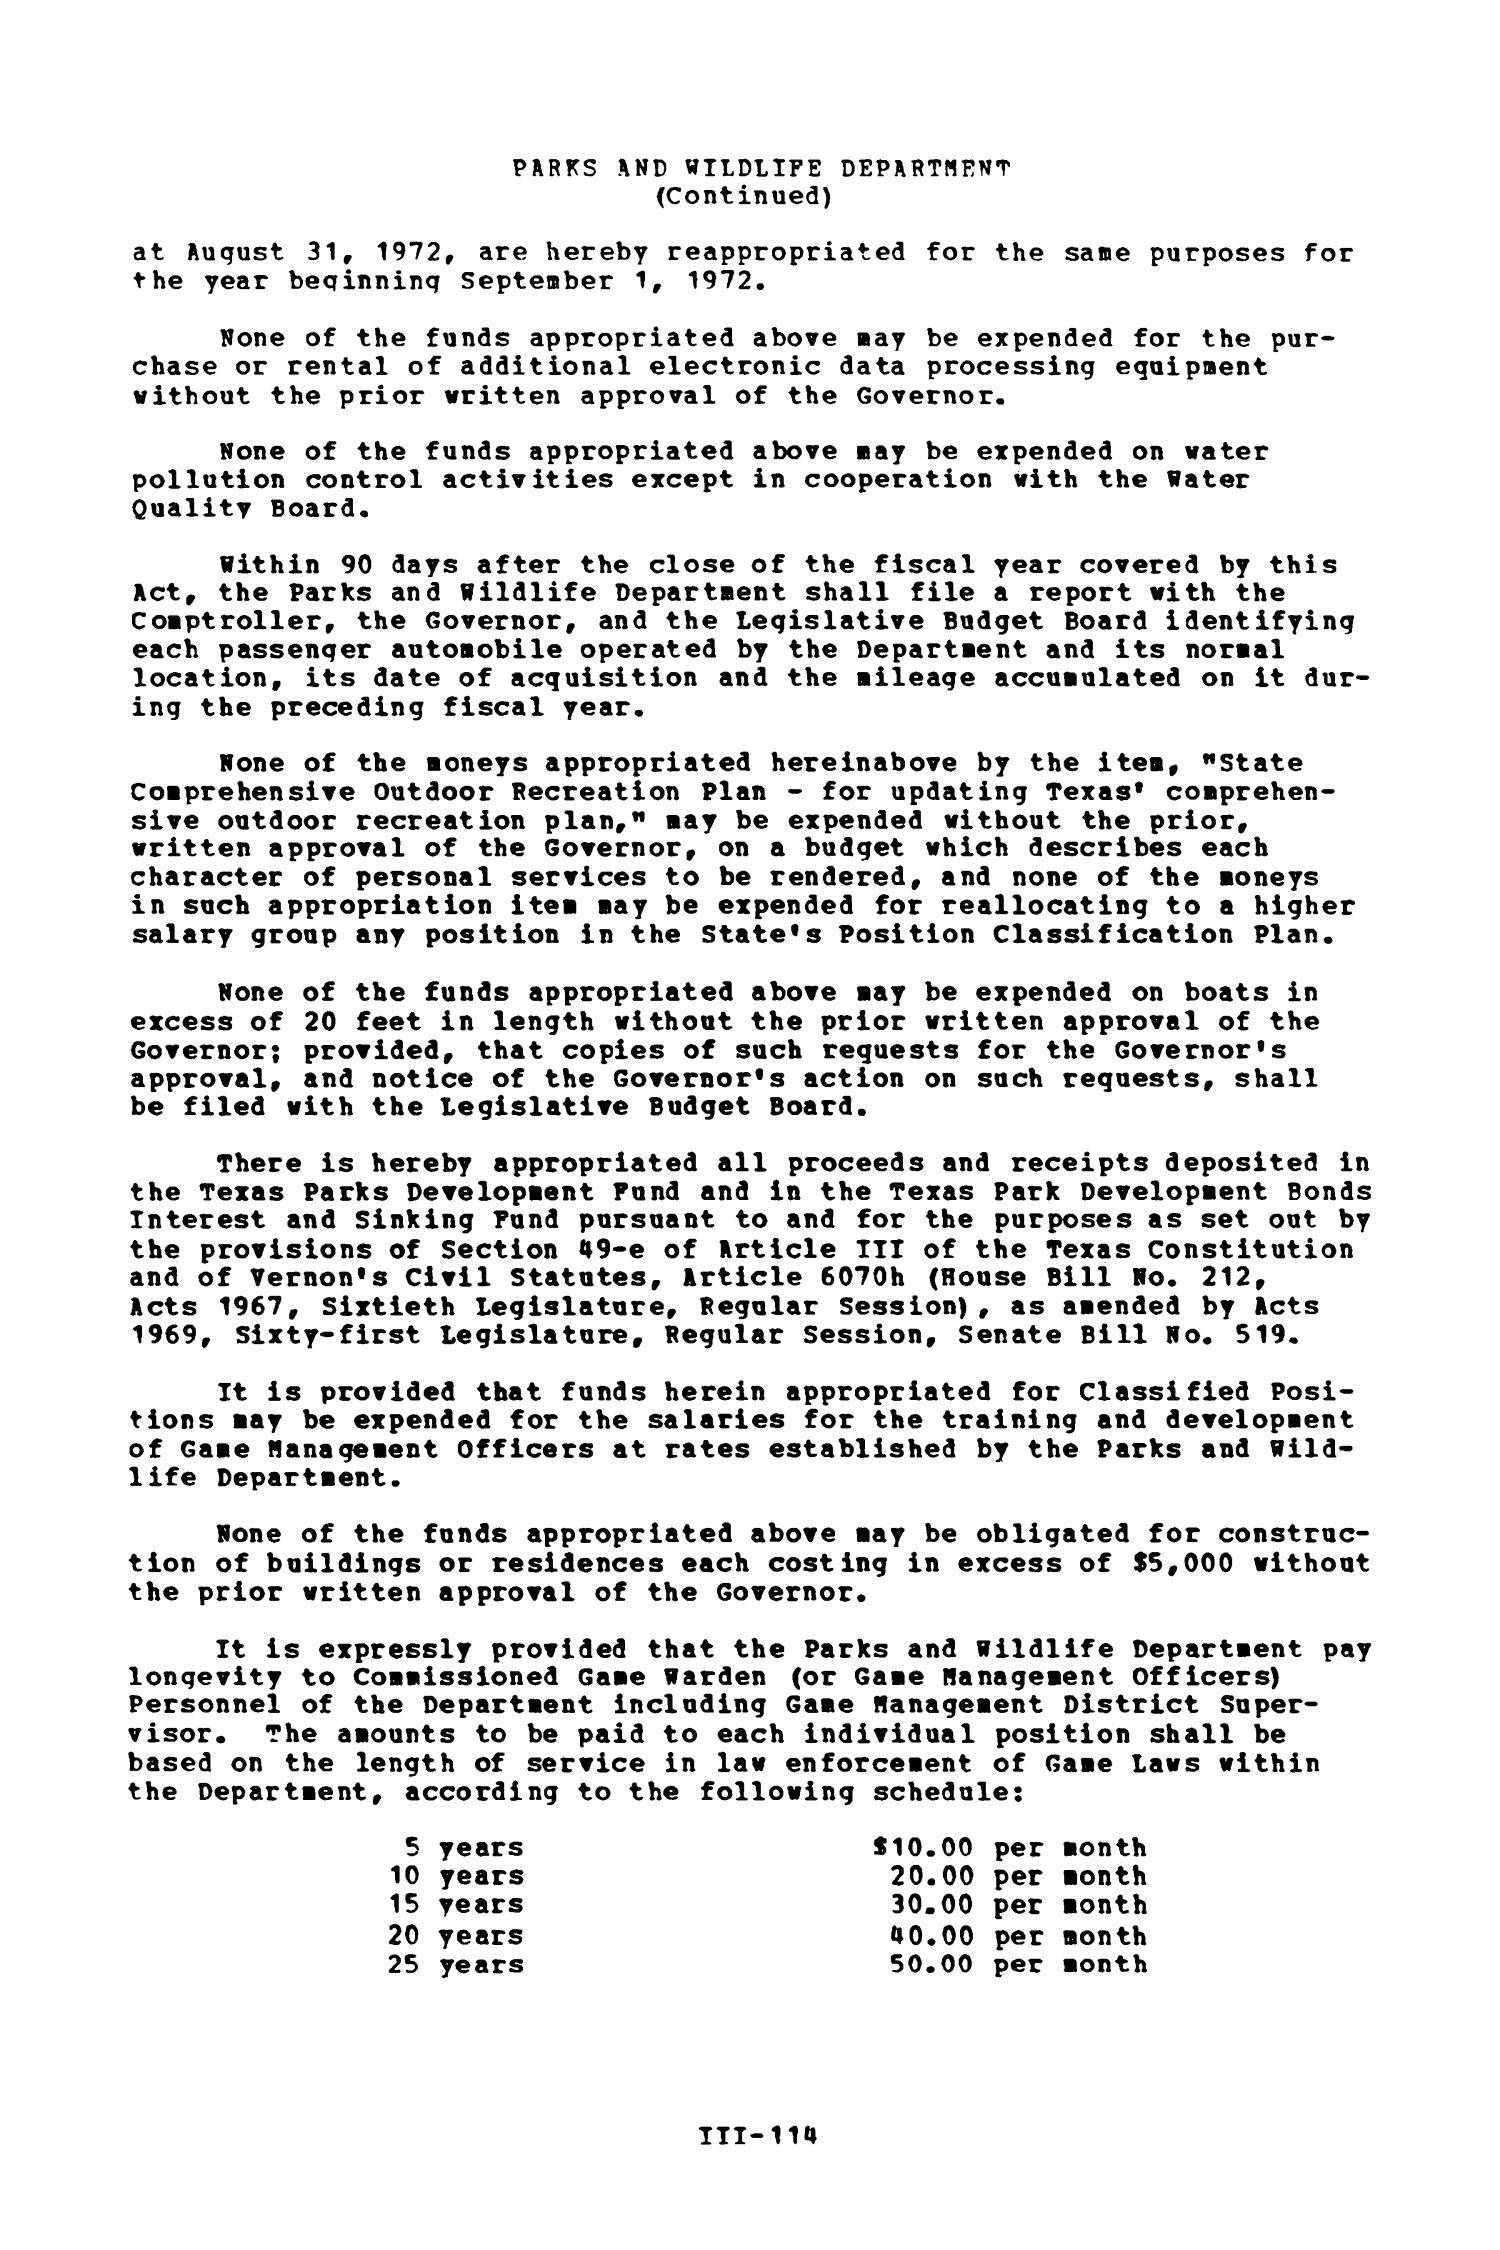 Journal Supplement, Text of Senate Bill No. 11, Regular Session as Amended by Senate Bill No. 7, First Called Session, Sixty-Second Legislature, State of Texas, 1971
                                                
                                                    114
                                                